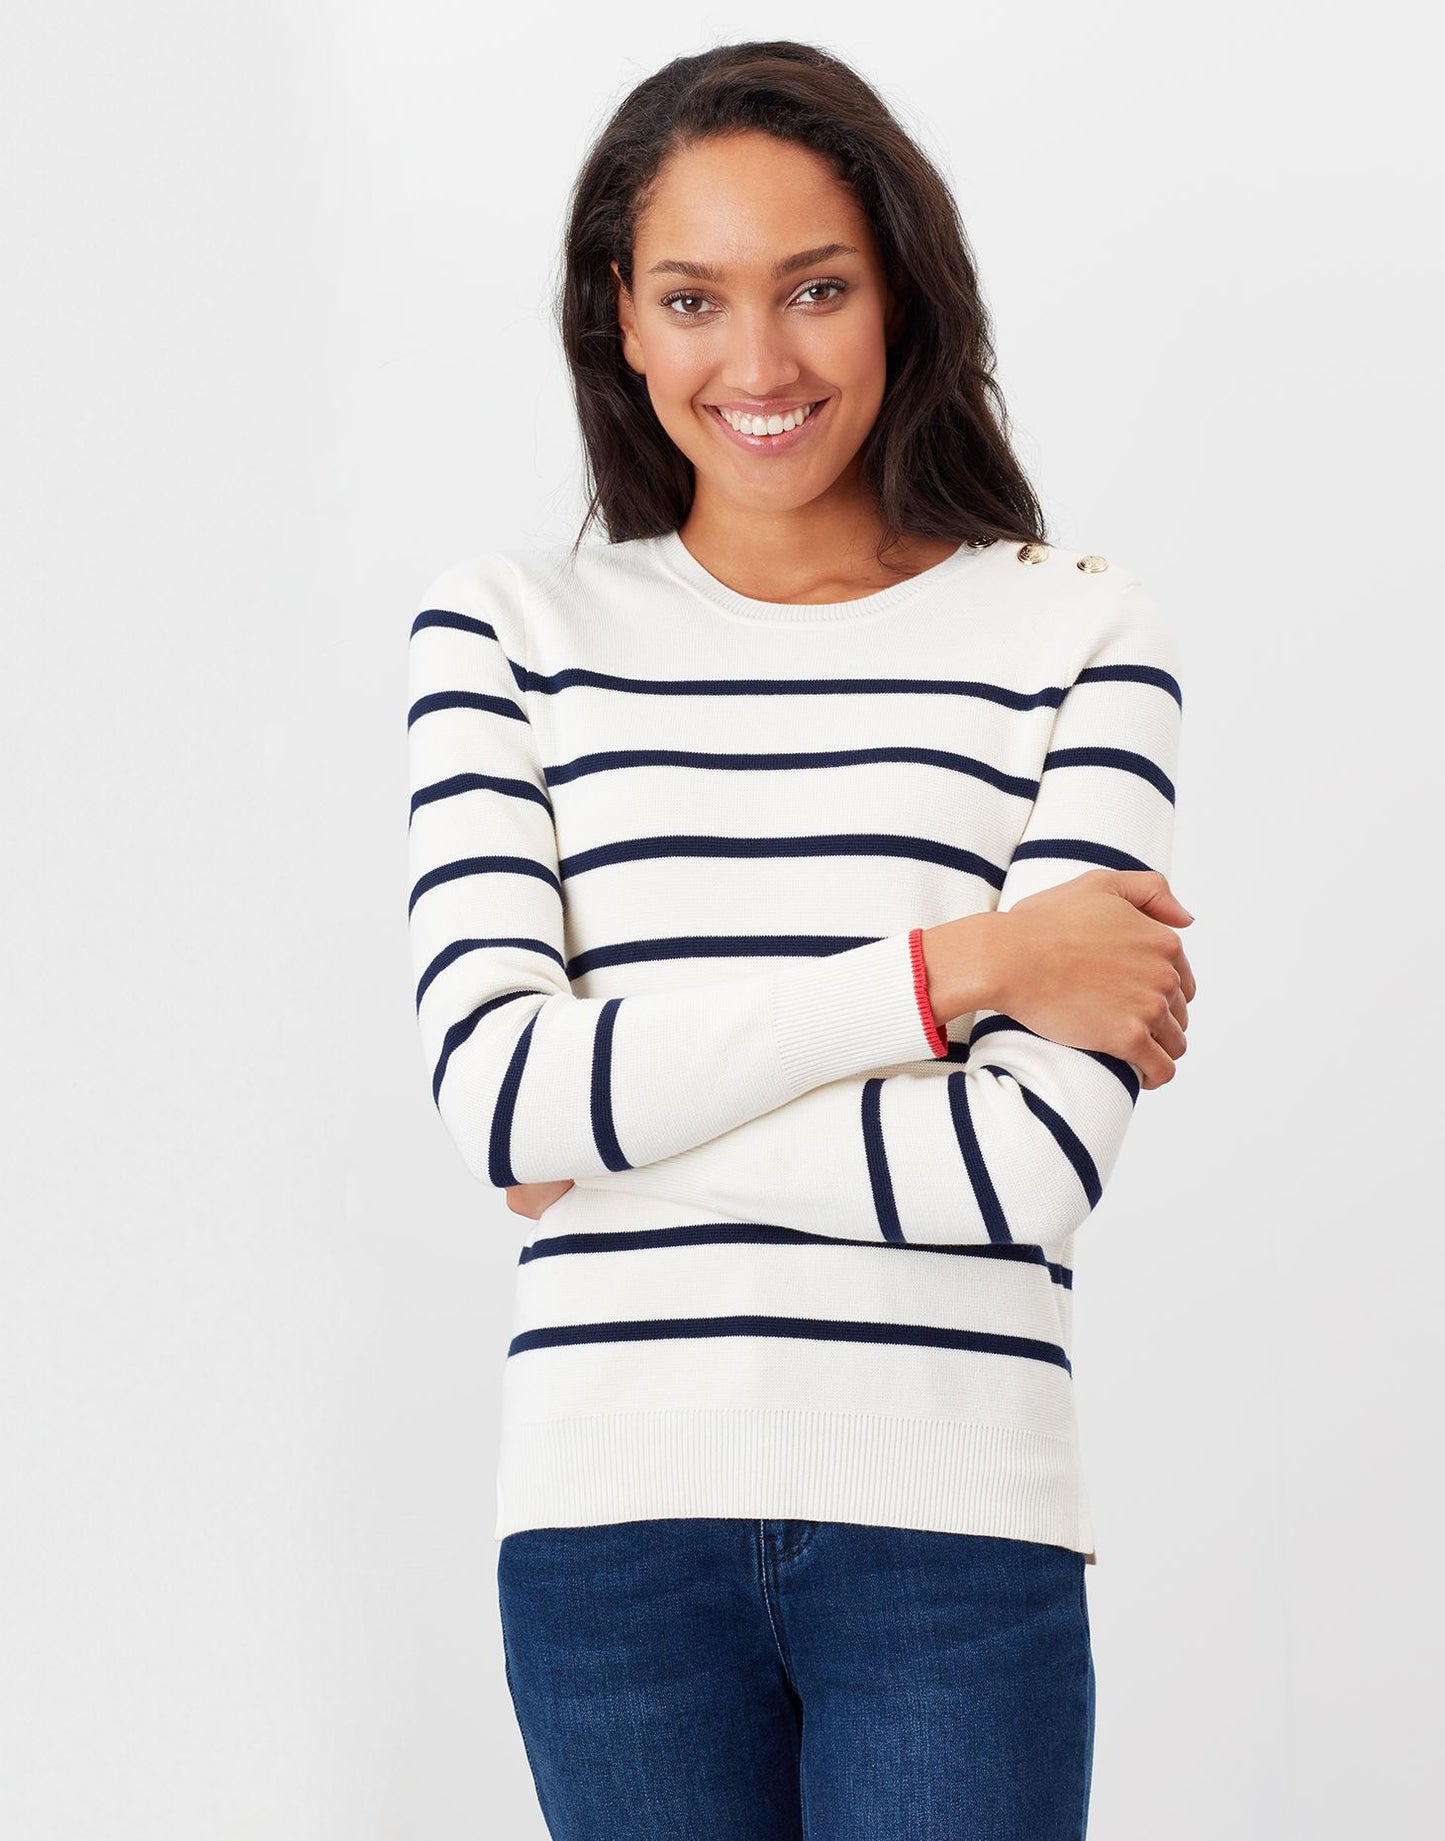 Joules Portlow Jumper with Button Shoulder